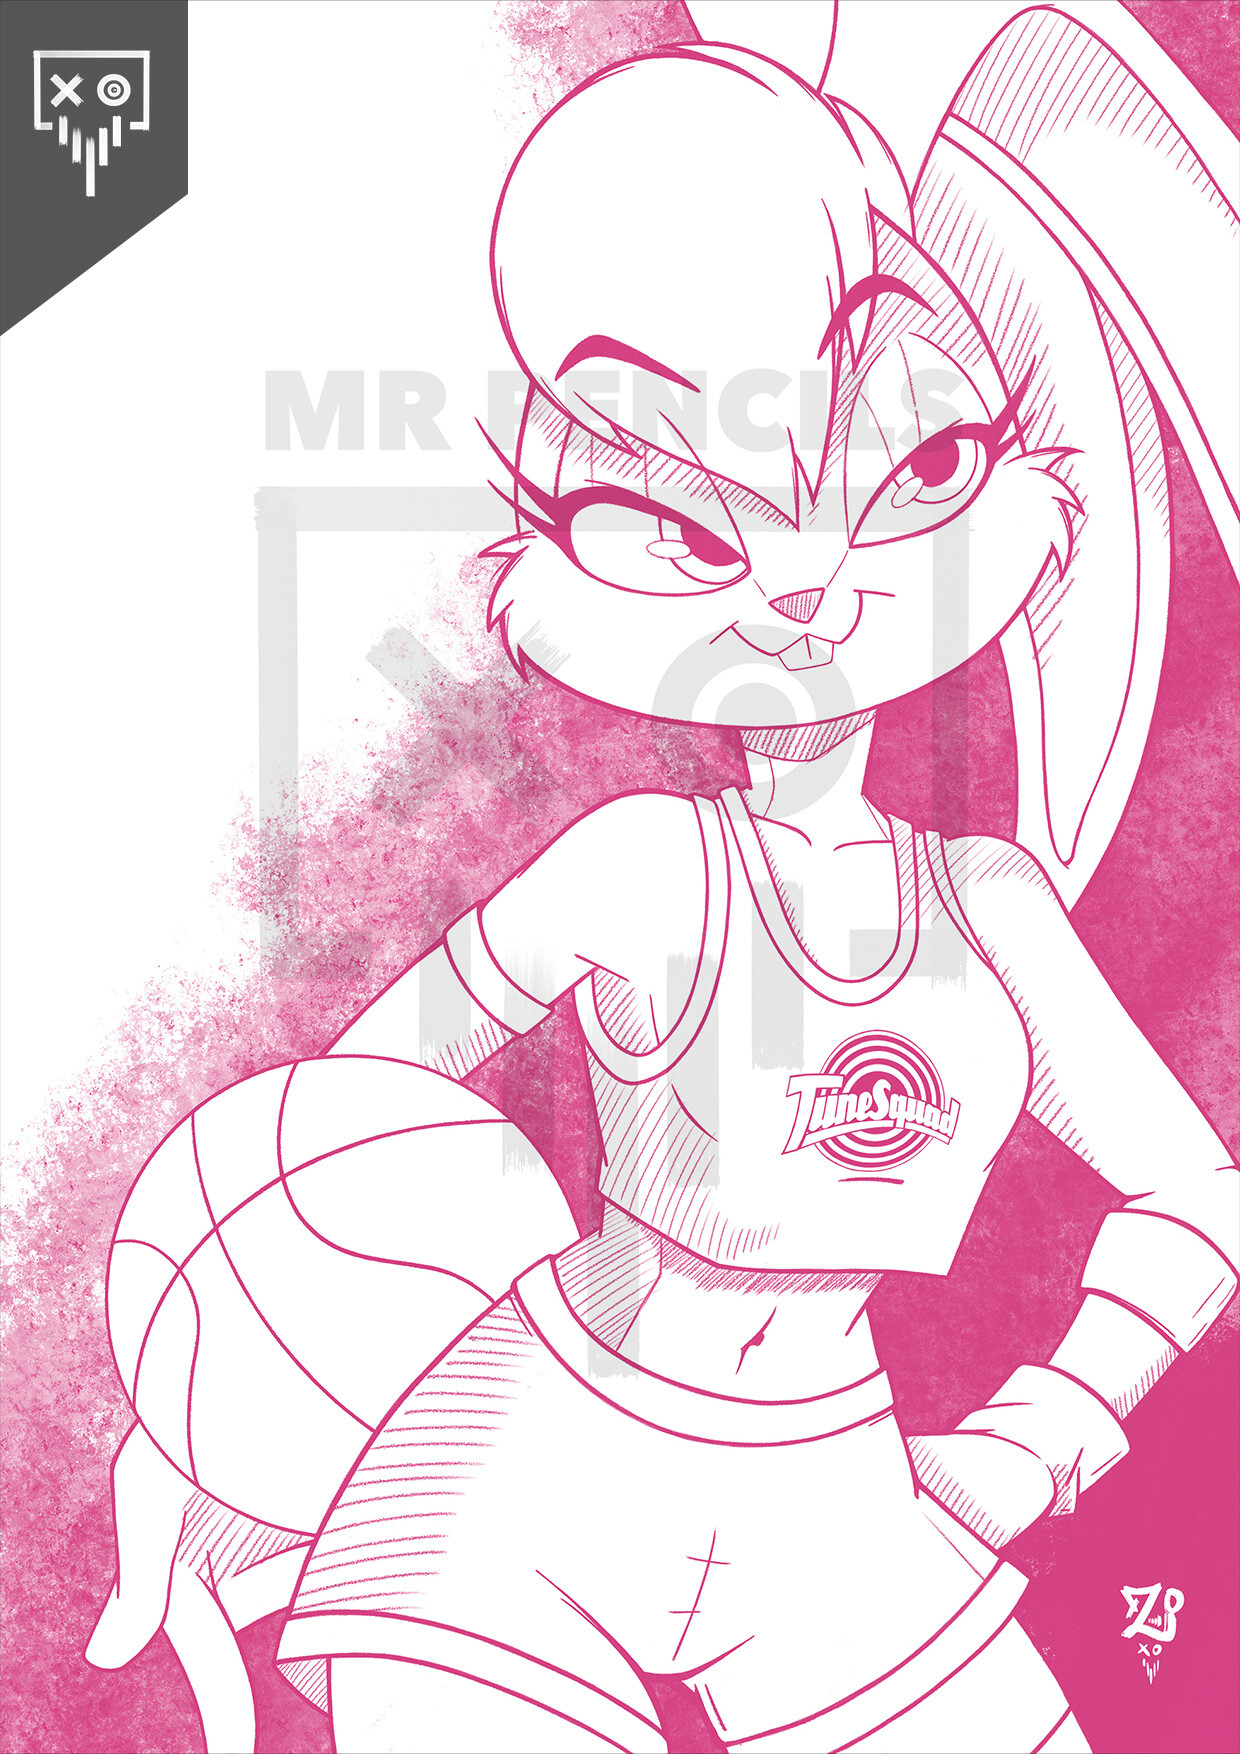 Lola Bunny Spinning Basketball Coloring Pages  Download  Print Online  Coloring Pages for Free  Col  Bunny coloring pages Coloring pages  Online coloring pages